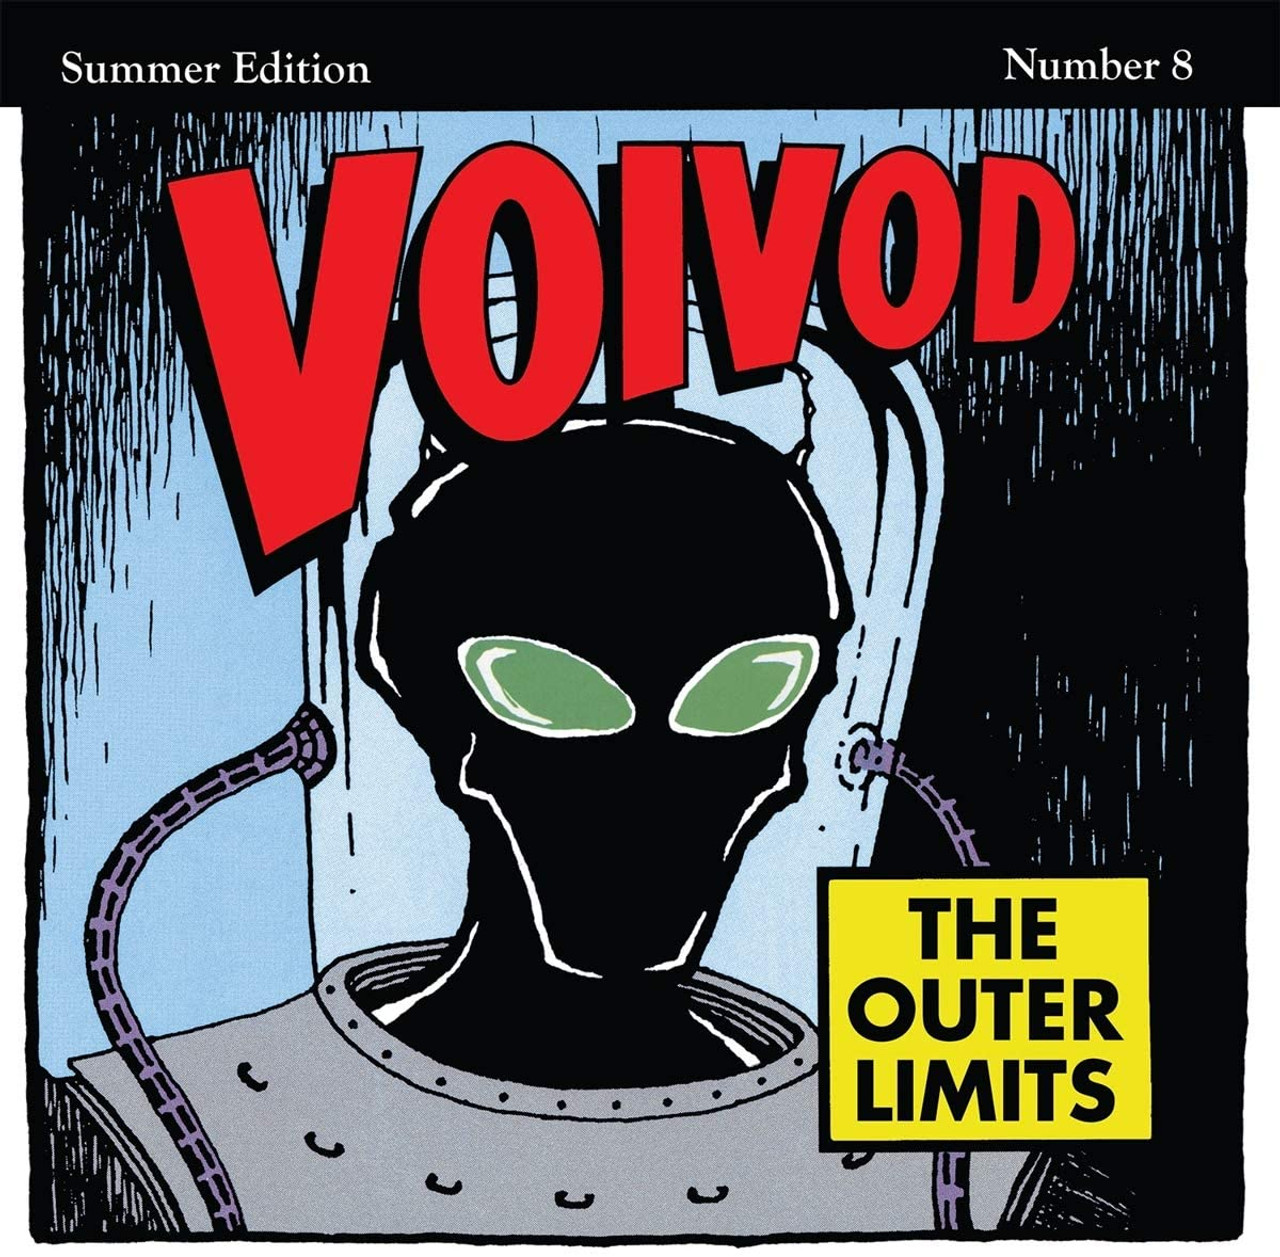 Voivod 'The Outer Limits' LP 'Rocket Fire' Red & Black Smoke Vinyl